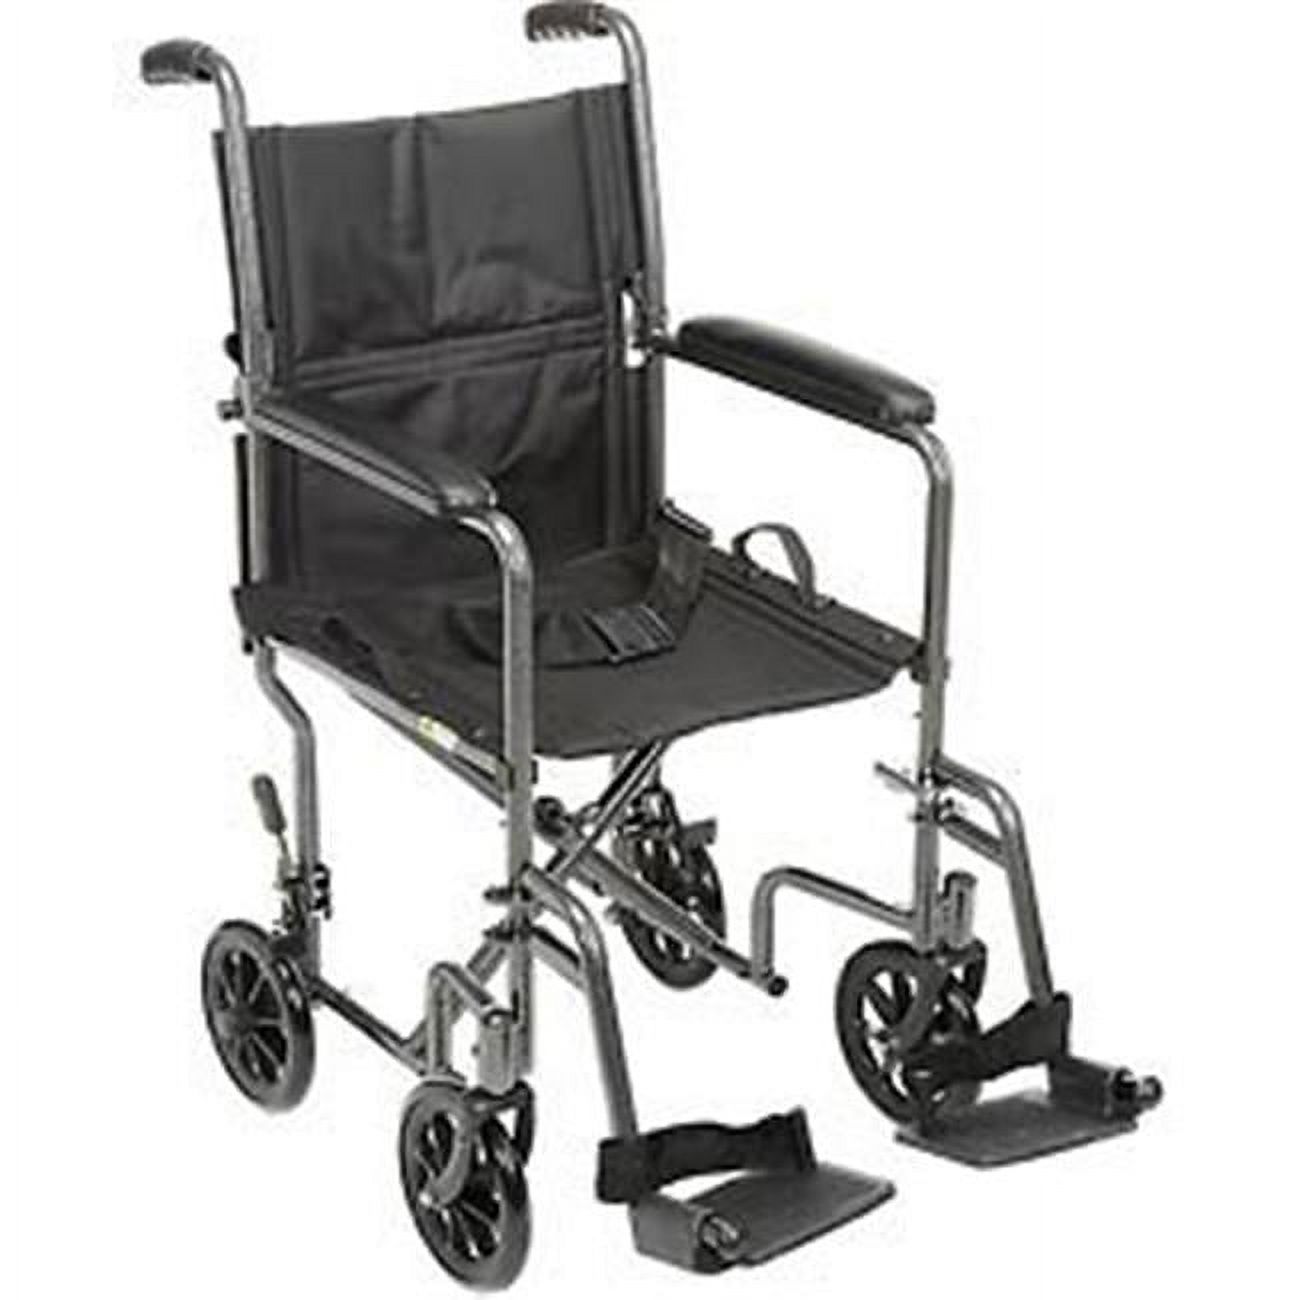 Lightweight Steel Transport Wheelchair, 19"W Seat, Silver Vein Frame and Black Upholstery - image 1 of 1